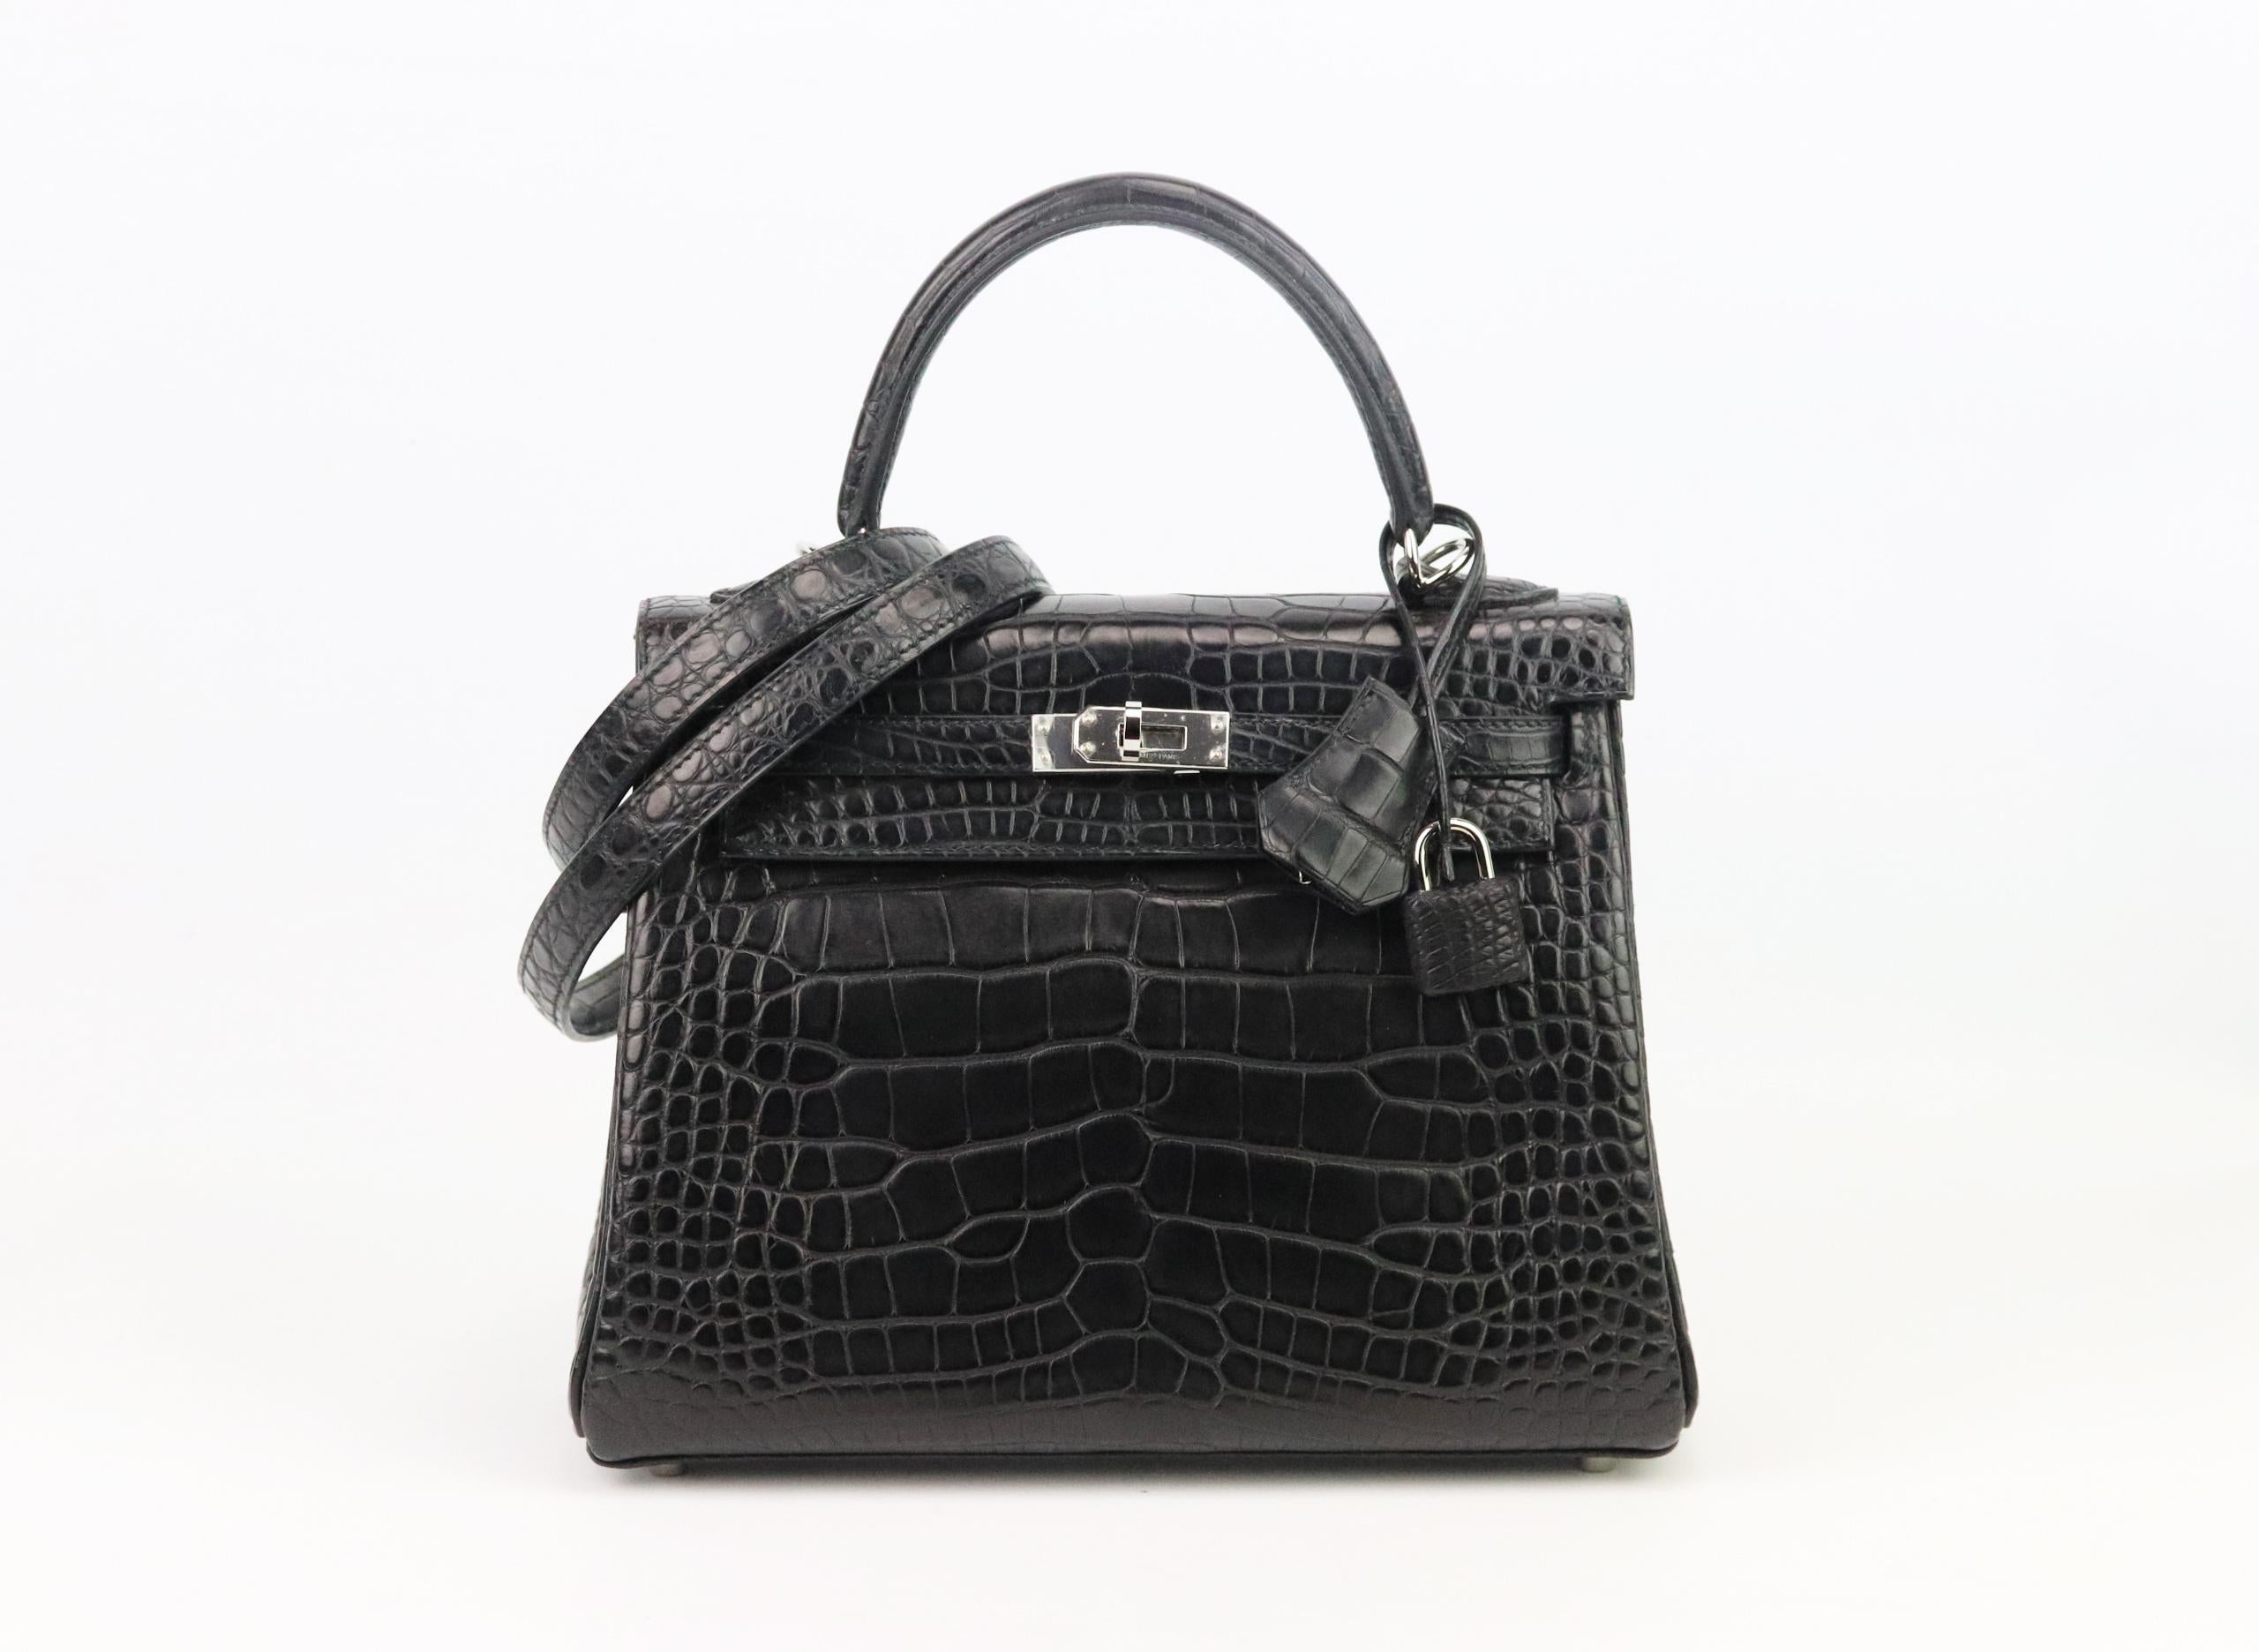 Made in France, this beautiful 2018 Hermès ‘Kelly’ 25cm handbag has been made from textured Matte Alligator Mississippiensis leather exterior in ‘noir’ and matching leather interior, this piece is decorated with palladium hardware on the front and